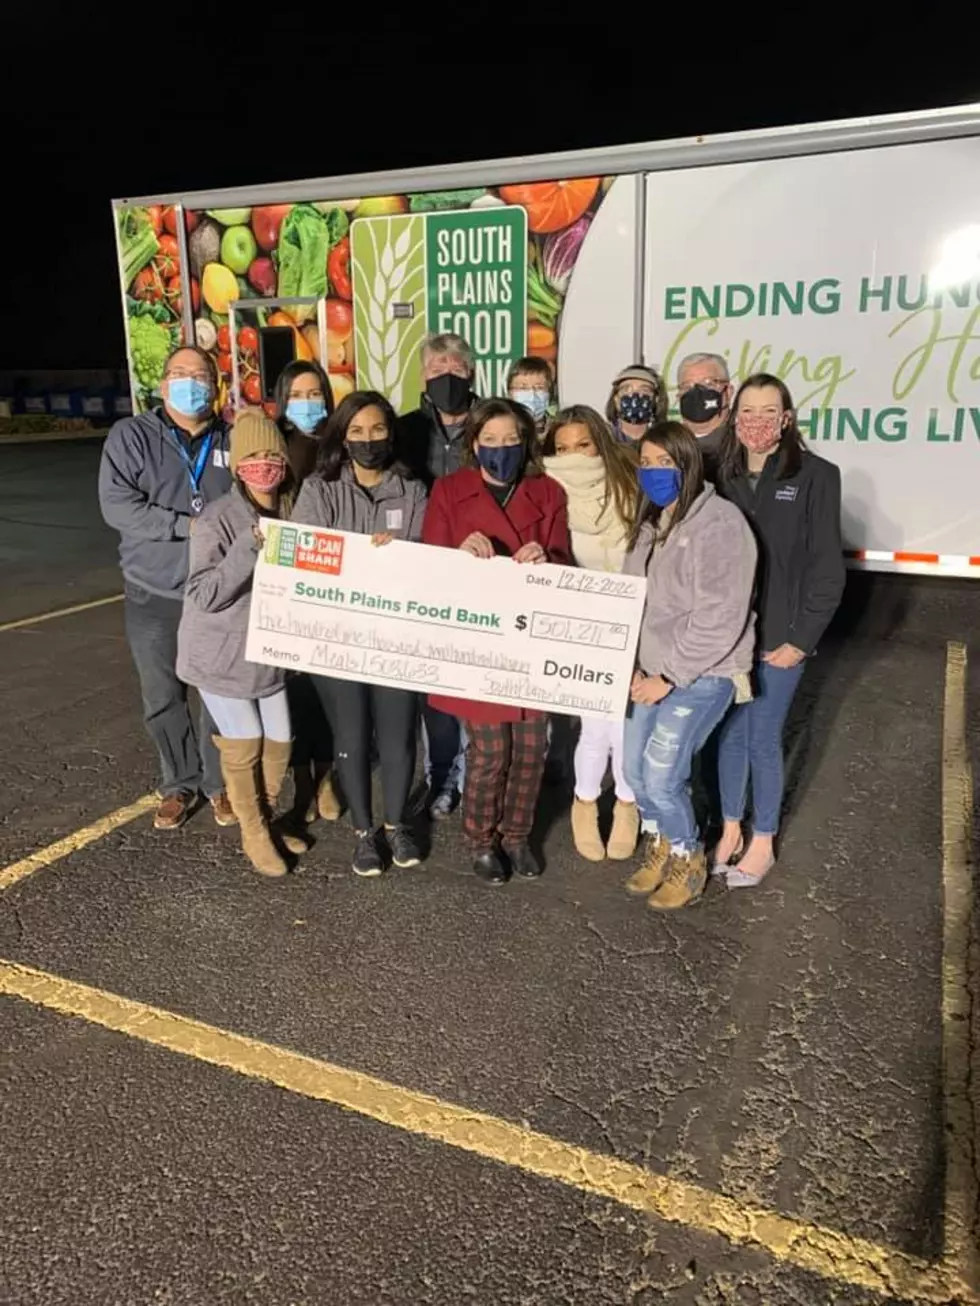 South Plains Food Bank Raises Over $500,000 During U Can Share Food Drive